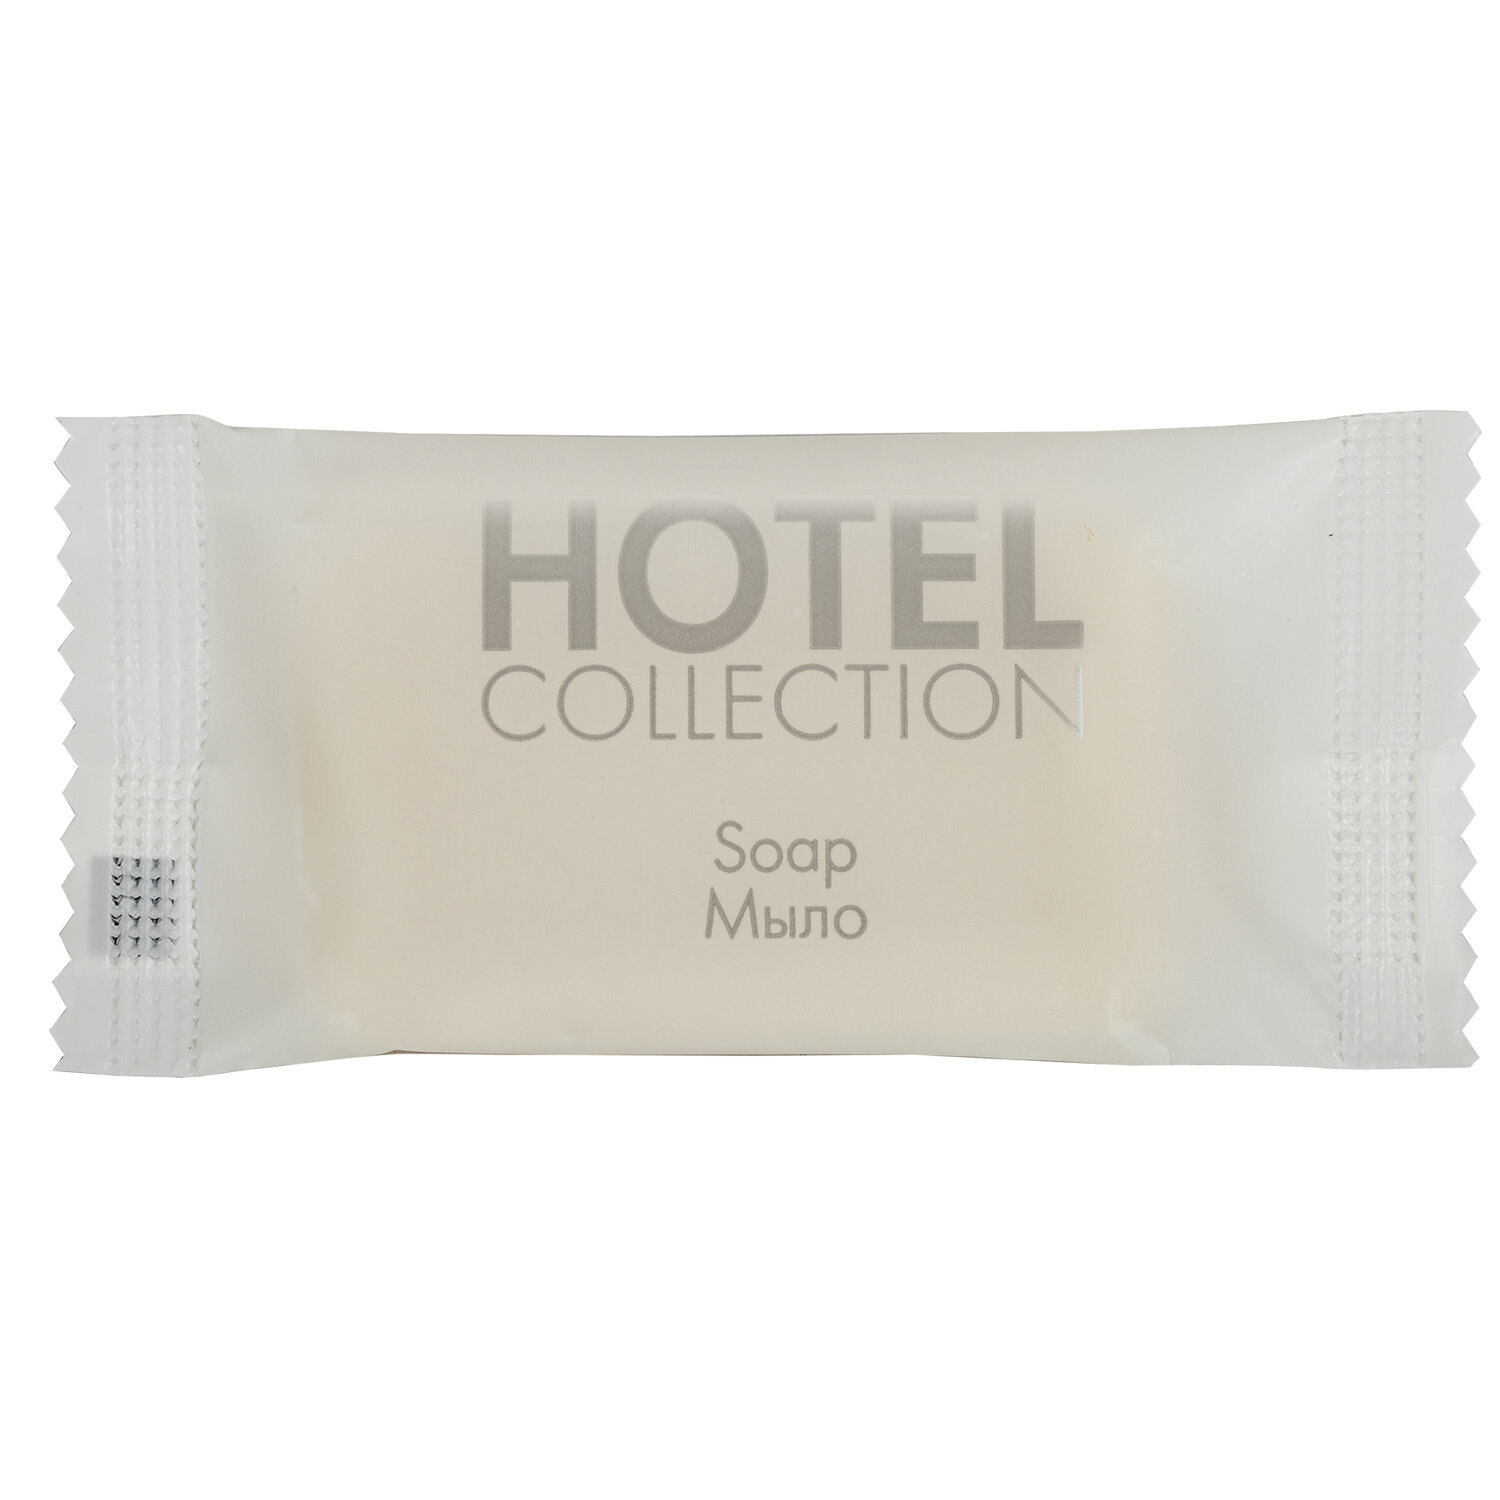  HOTEL COLLECTION 608844